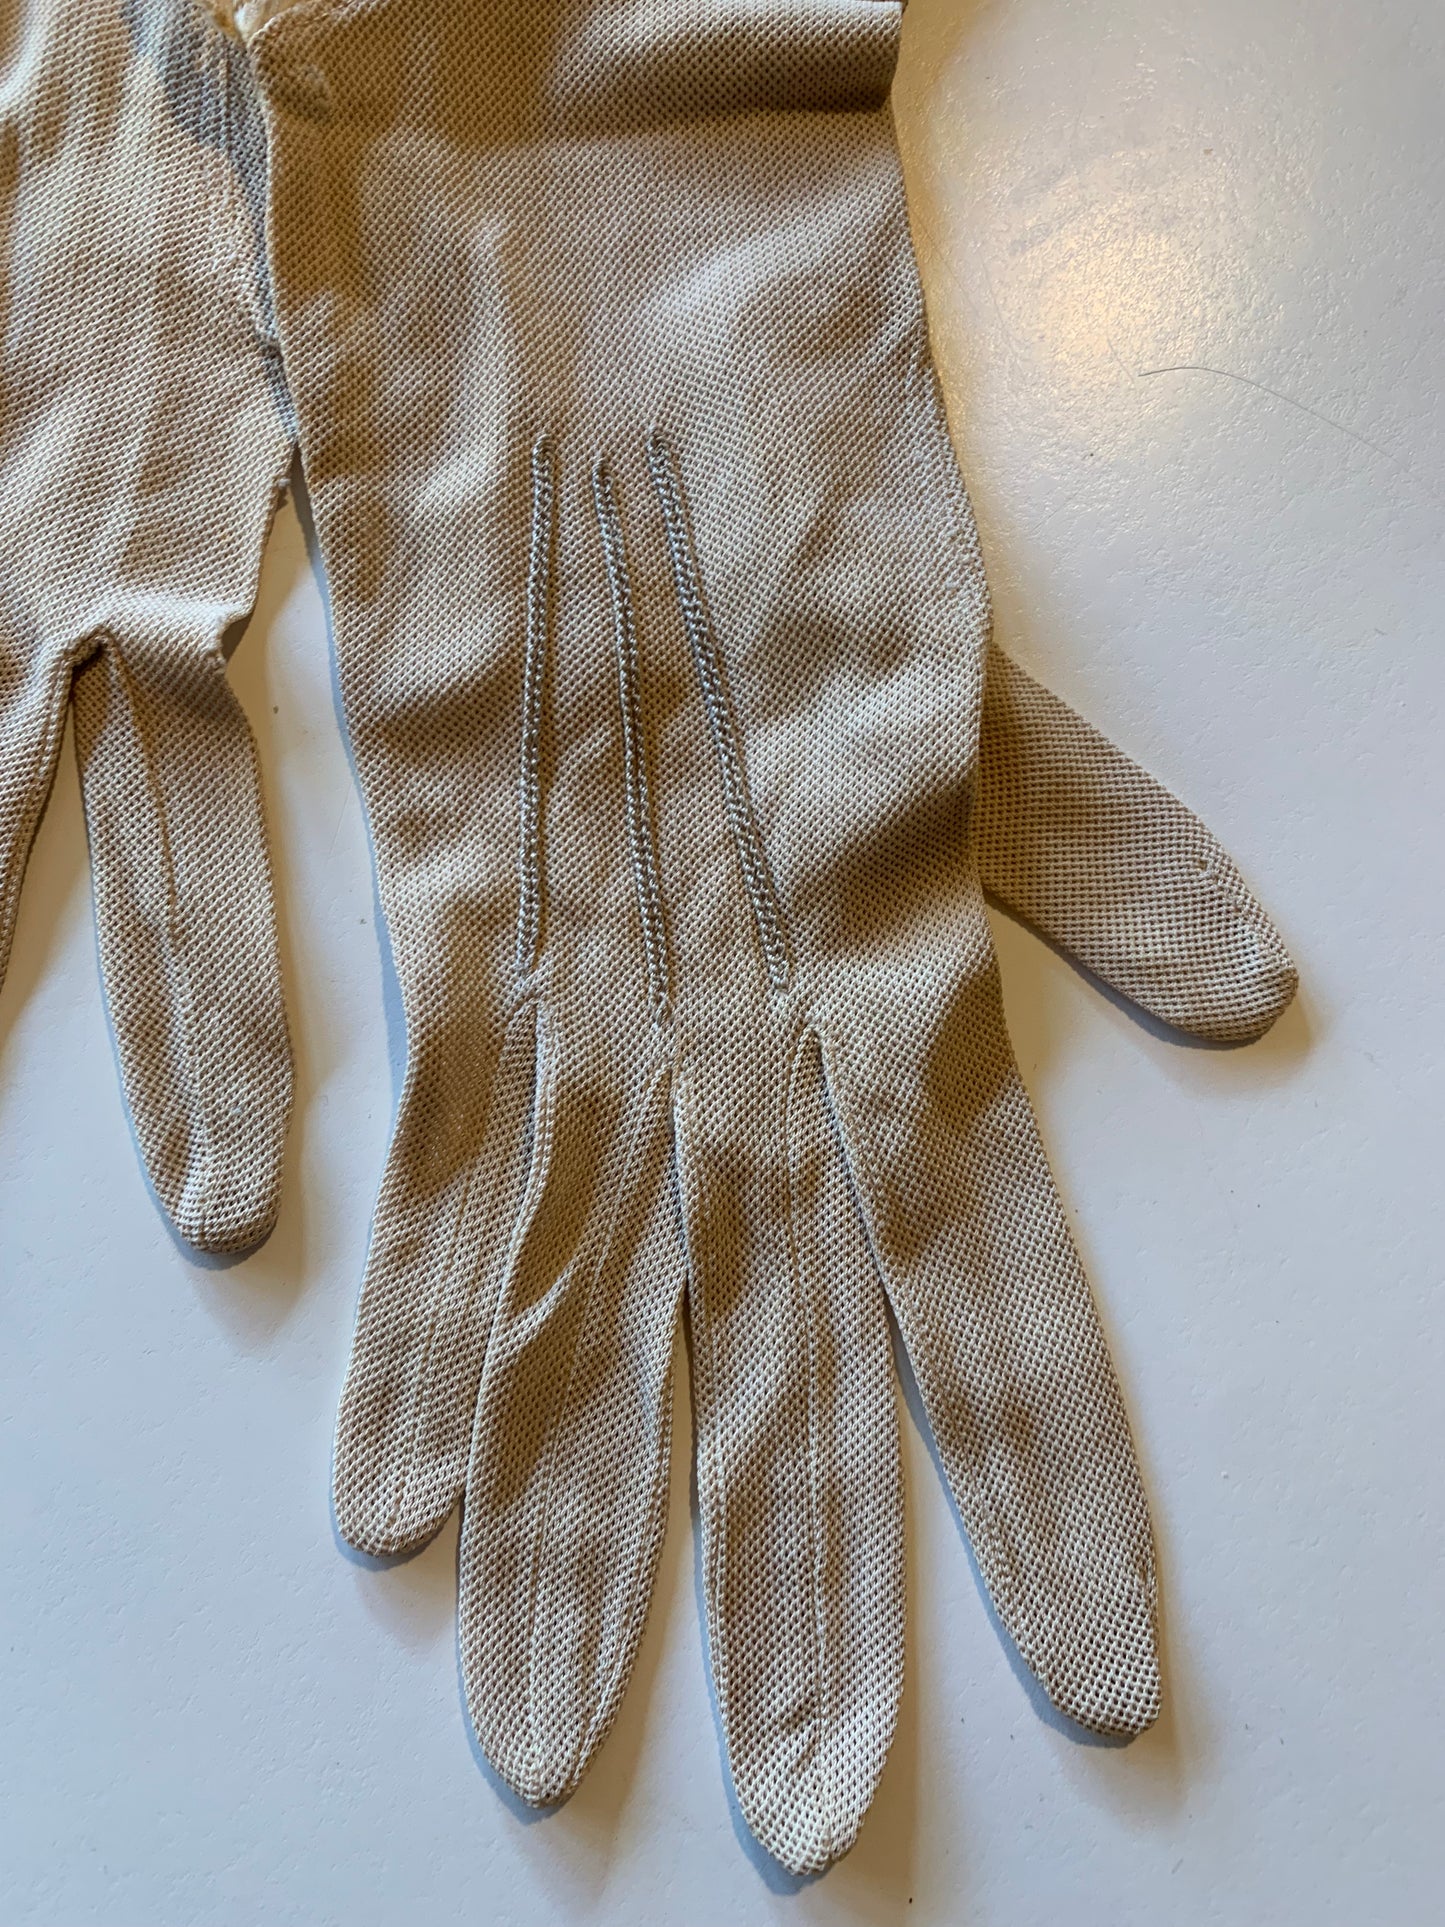 Ivory Jersey Mesh Gloves with Floral Fabric Appliqued Tatted Lace Wide Cuffs circa 1890s